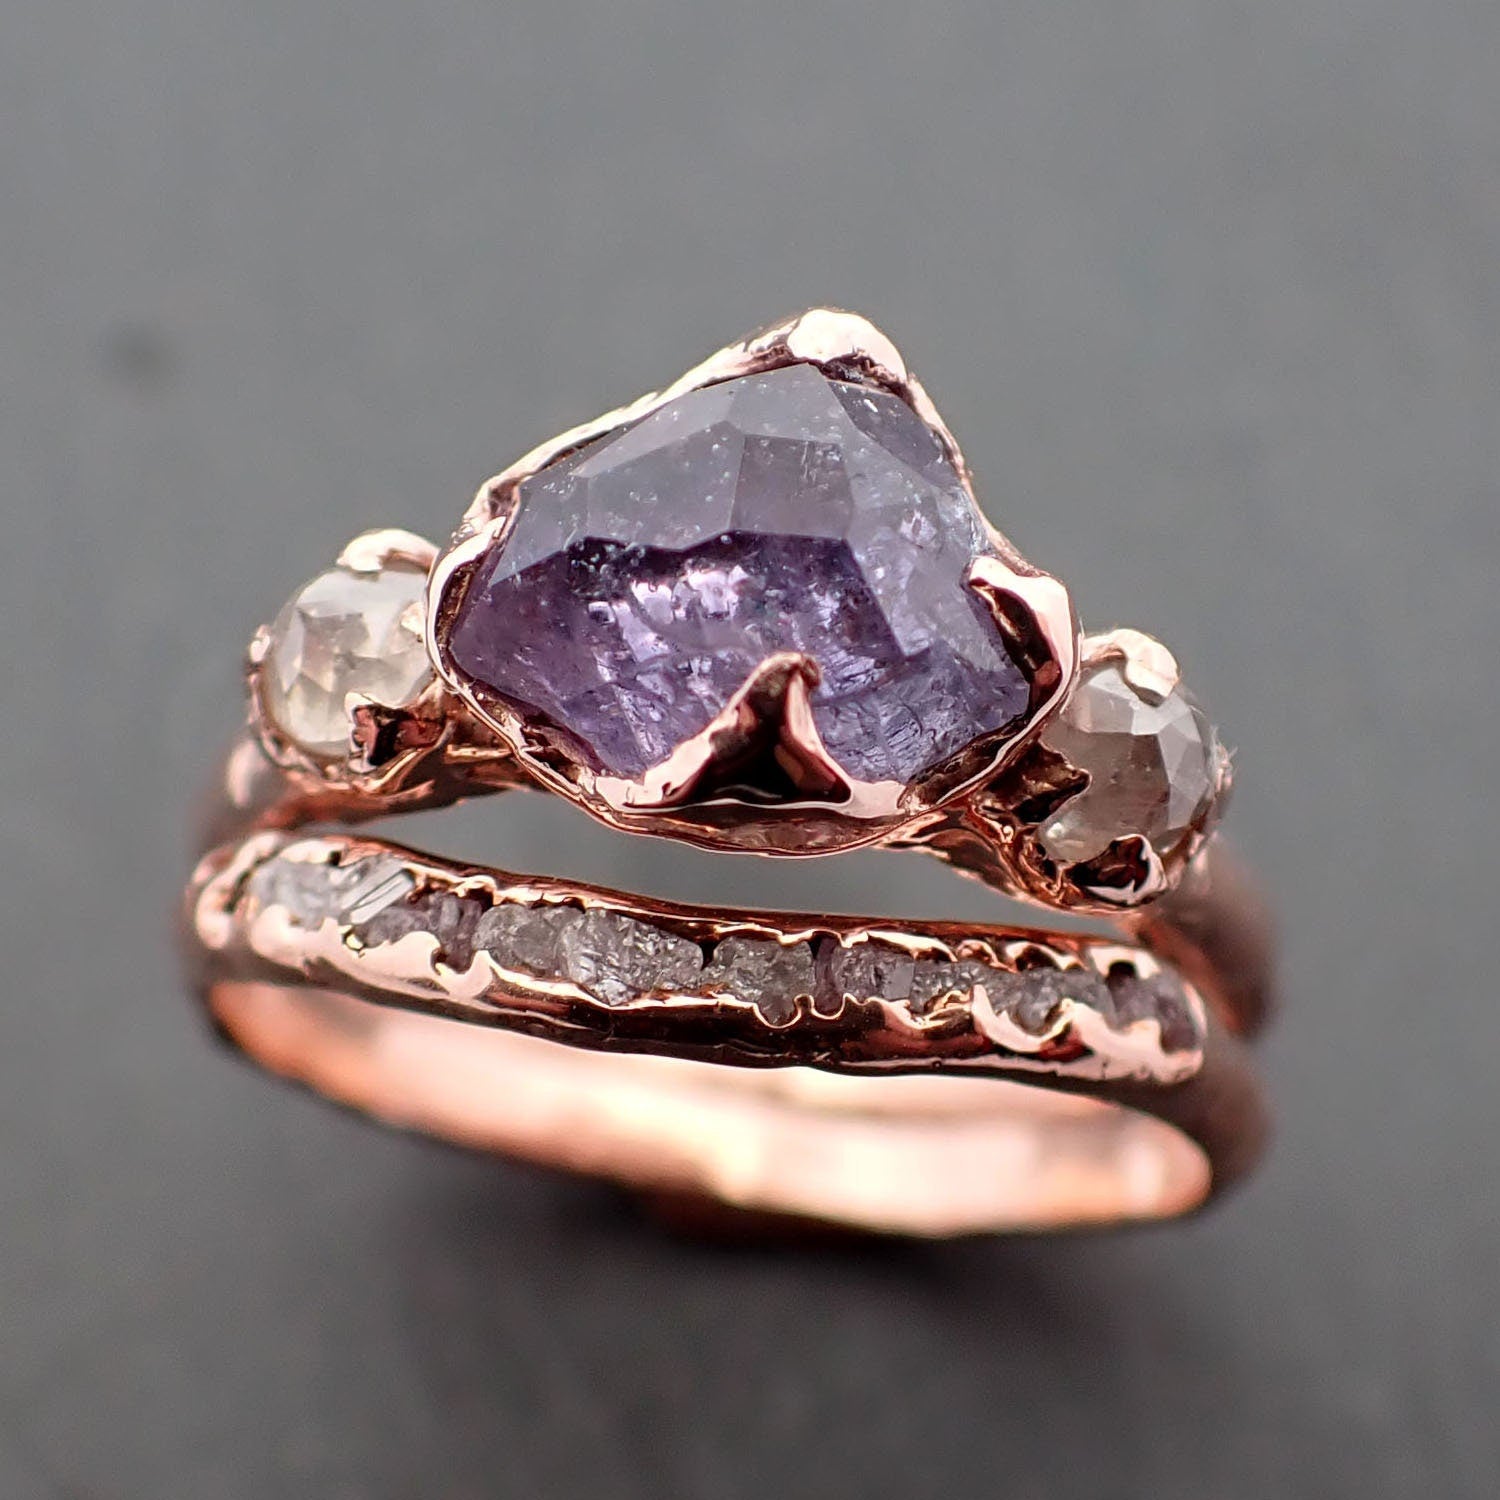 Partially Faceted Sapphire Raw Multi stone Rough Diamond 14k rose Gold Engagement Ring Wedding Ring Custom One Of a Kind Gemstone Ring 3423